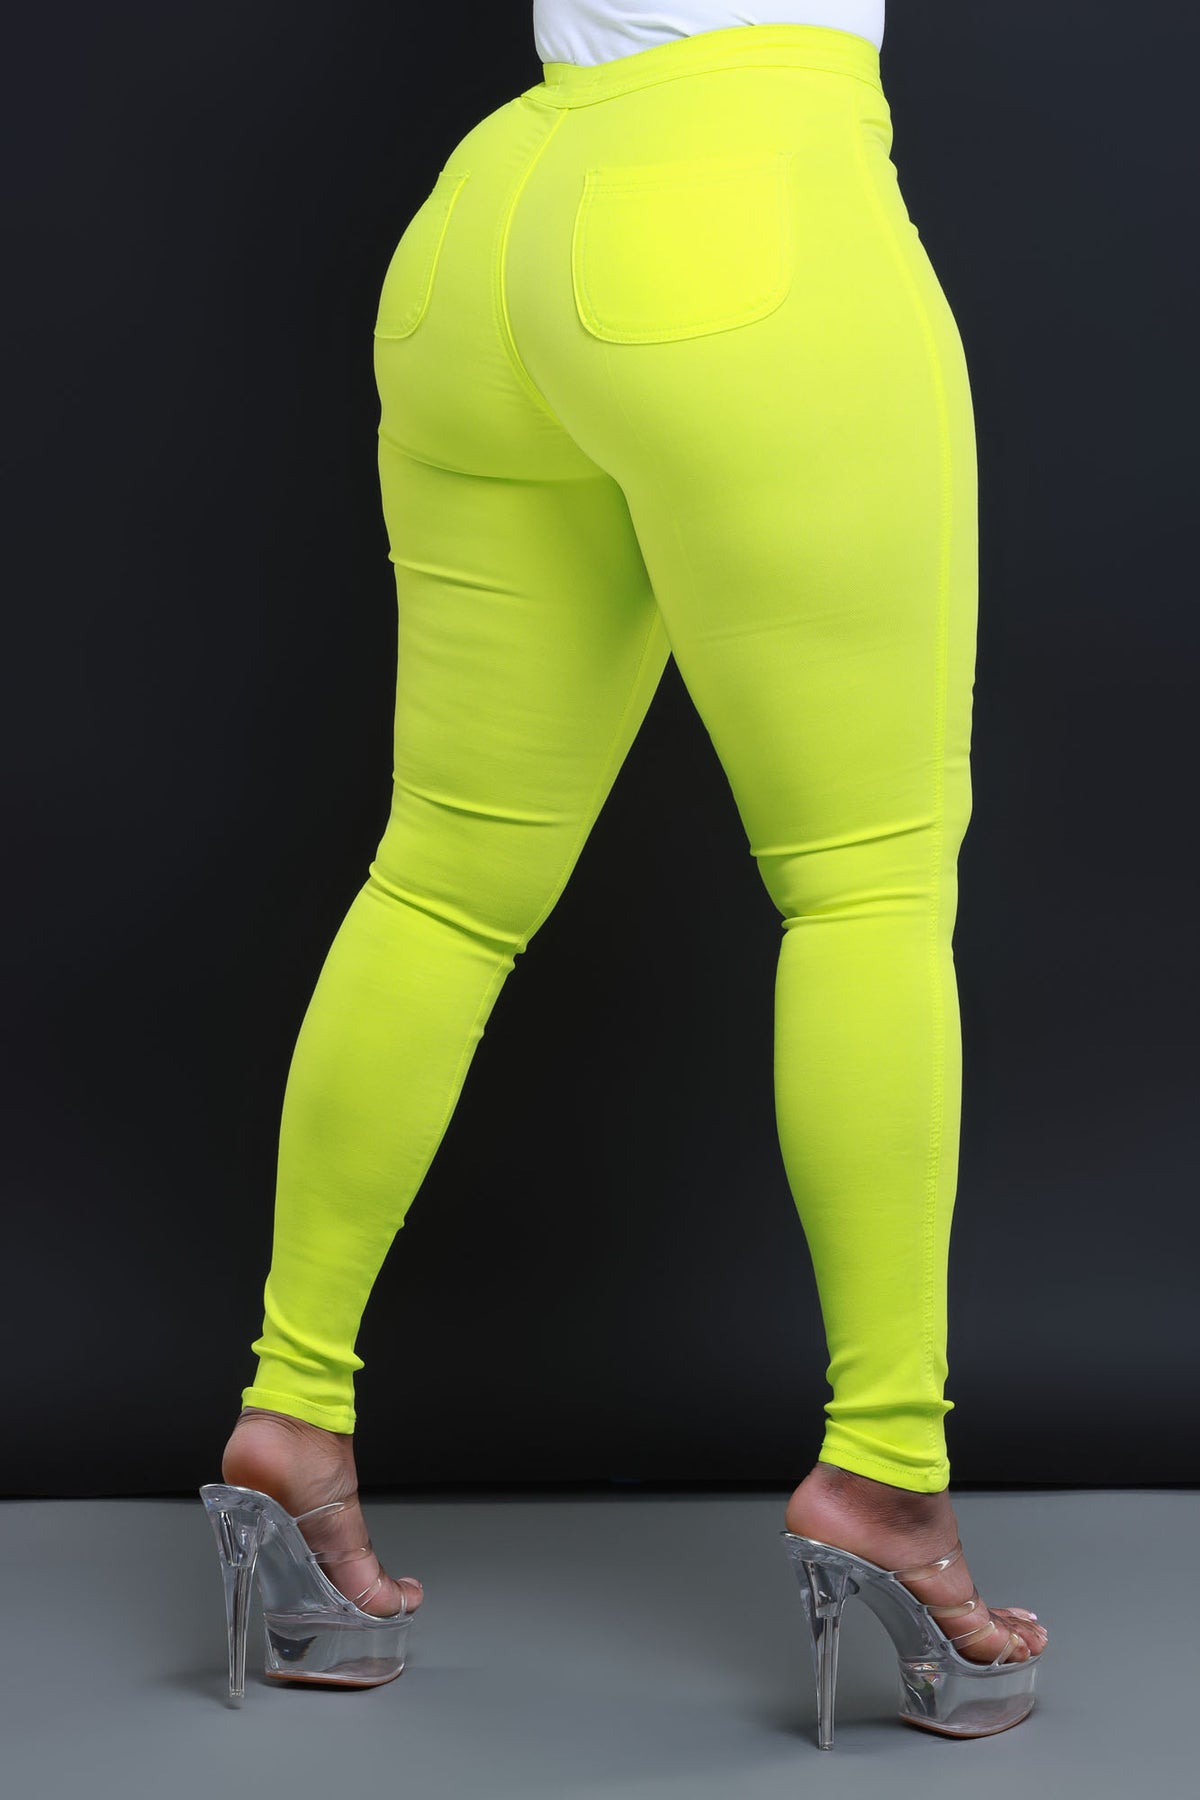 Neon Off Shoulder Philosophy Tube Top And Wide Leg Pants Set For Women  Perfect For Celebrity Parties 210525 From Long005, $39.01 | DHgate.Com